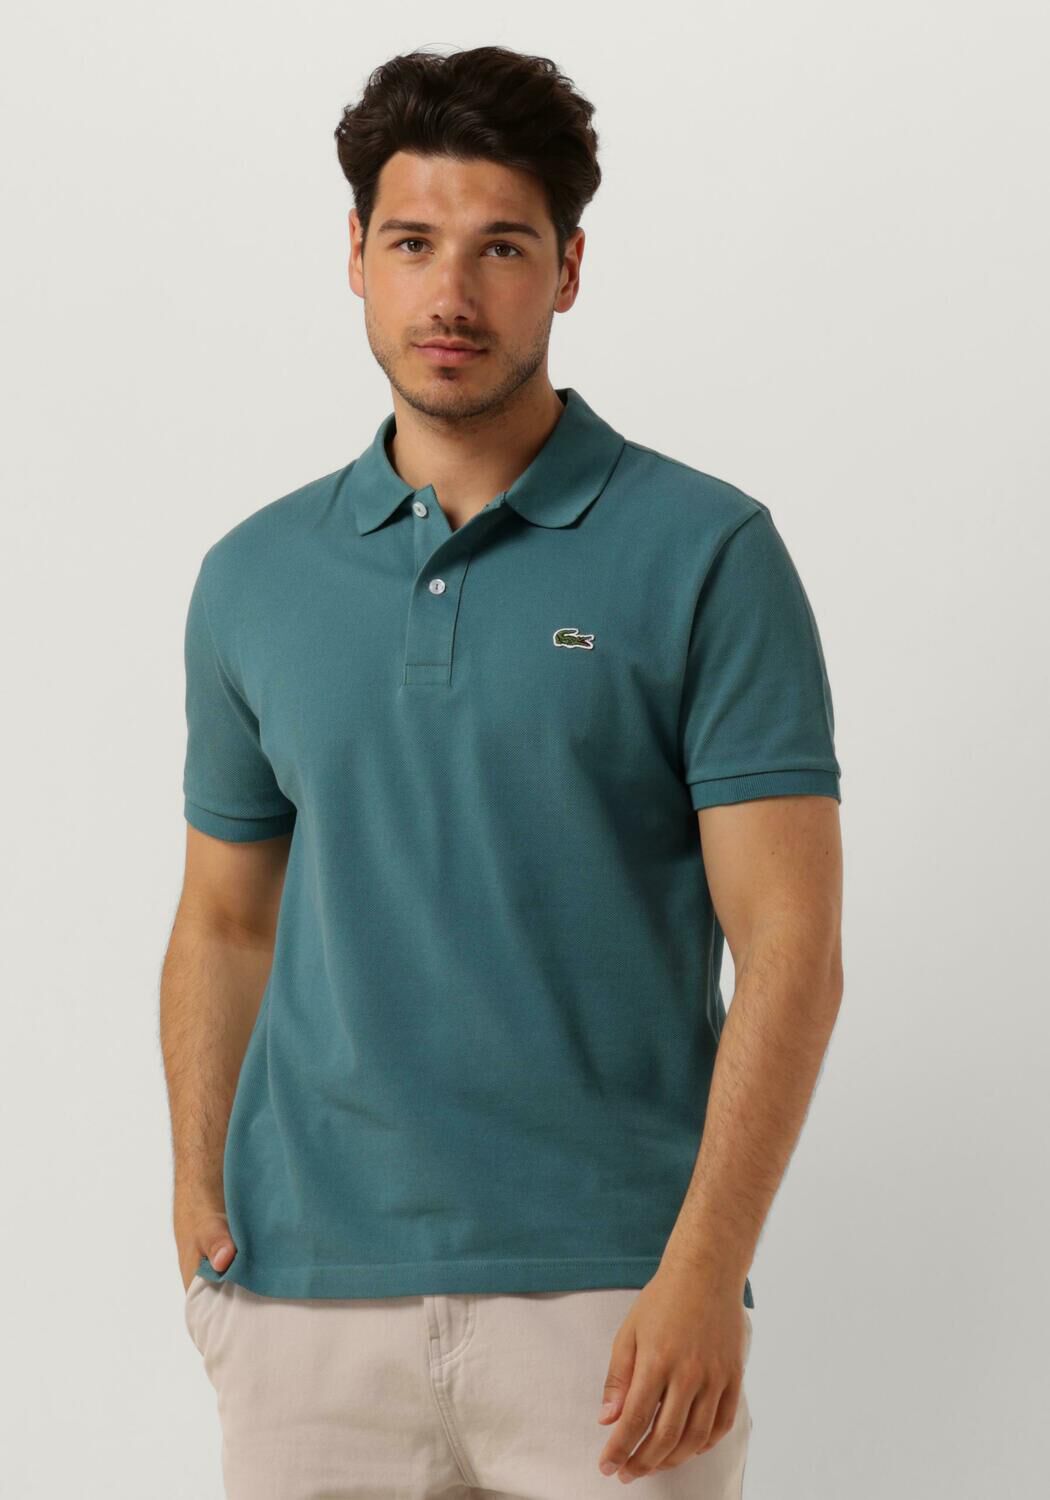 LACOSTE Heren Polo's & T-shirts 1hp3 Men's s Polo 01 Petrol